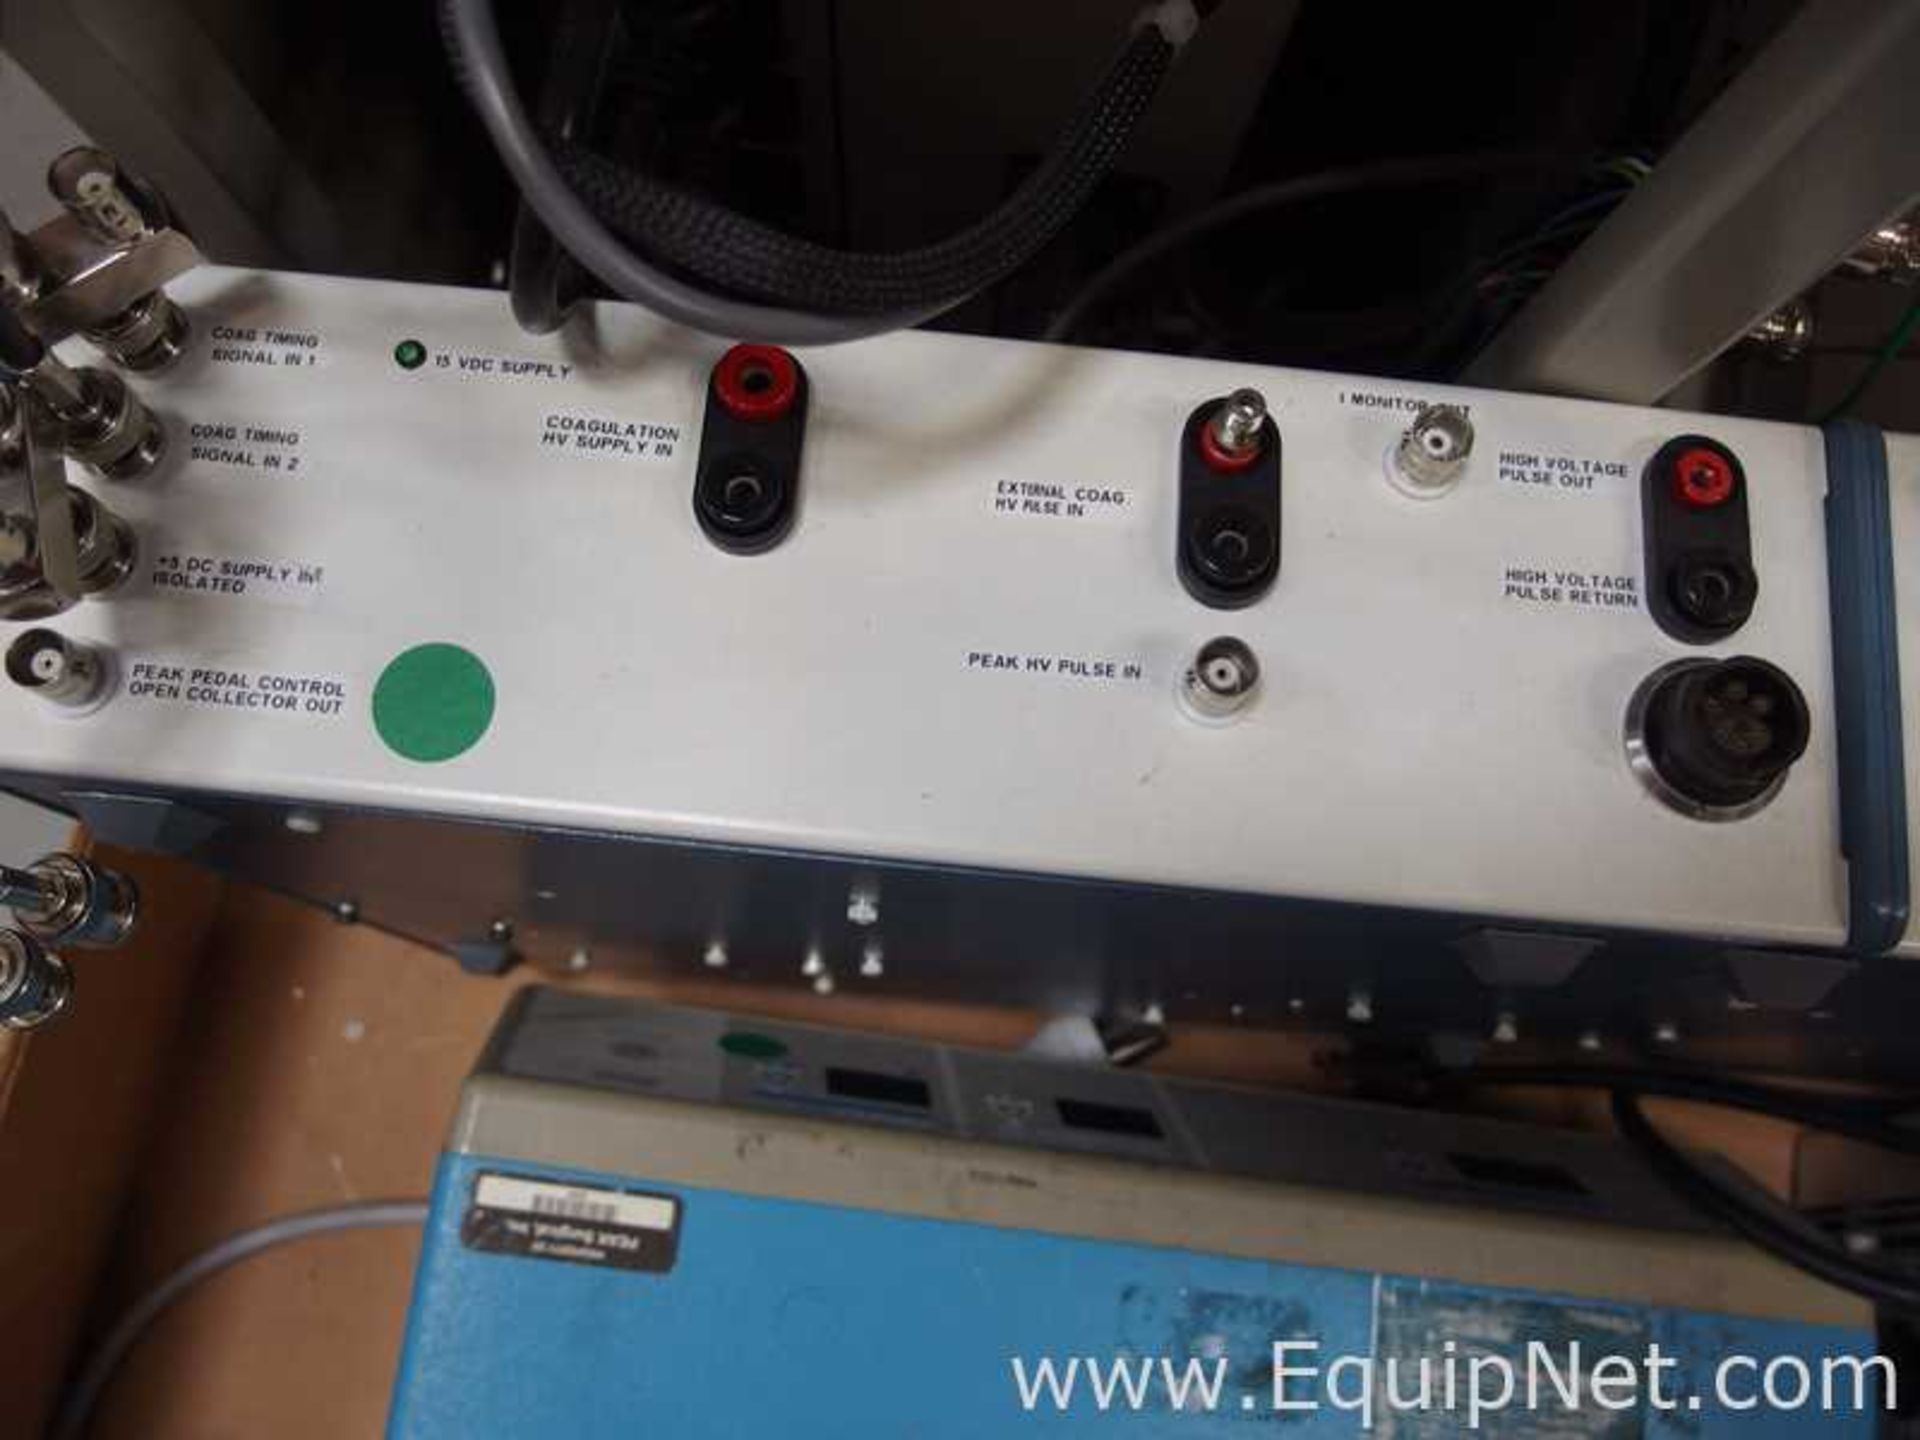 Lot of Miscellaneous ETM Equipment - Image 17 of 20